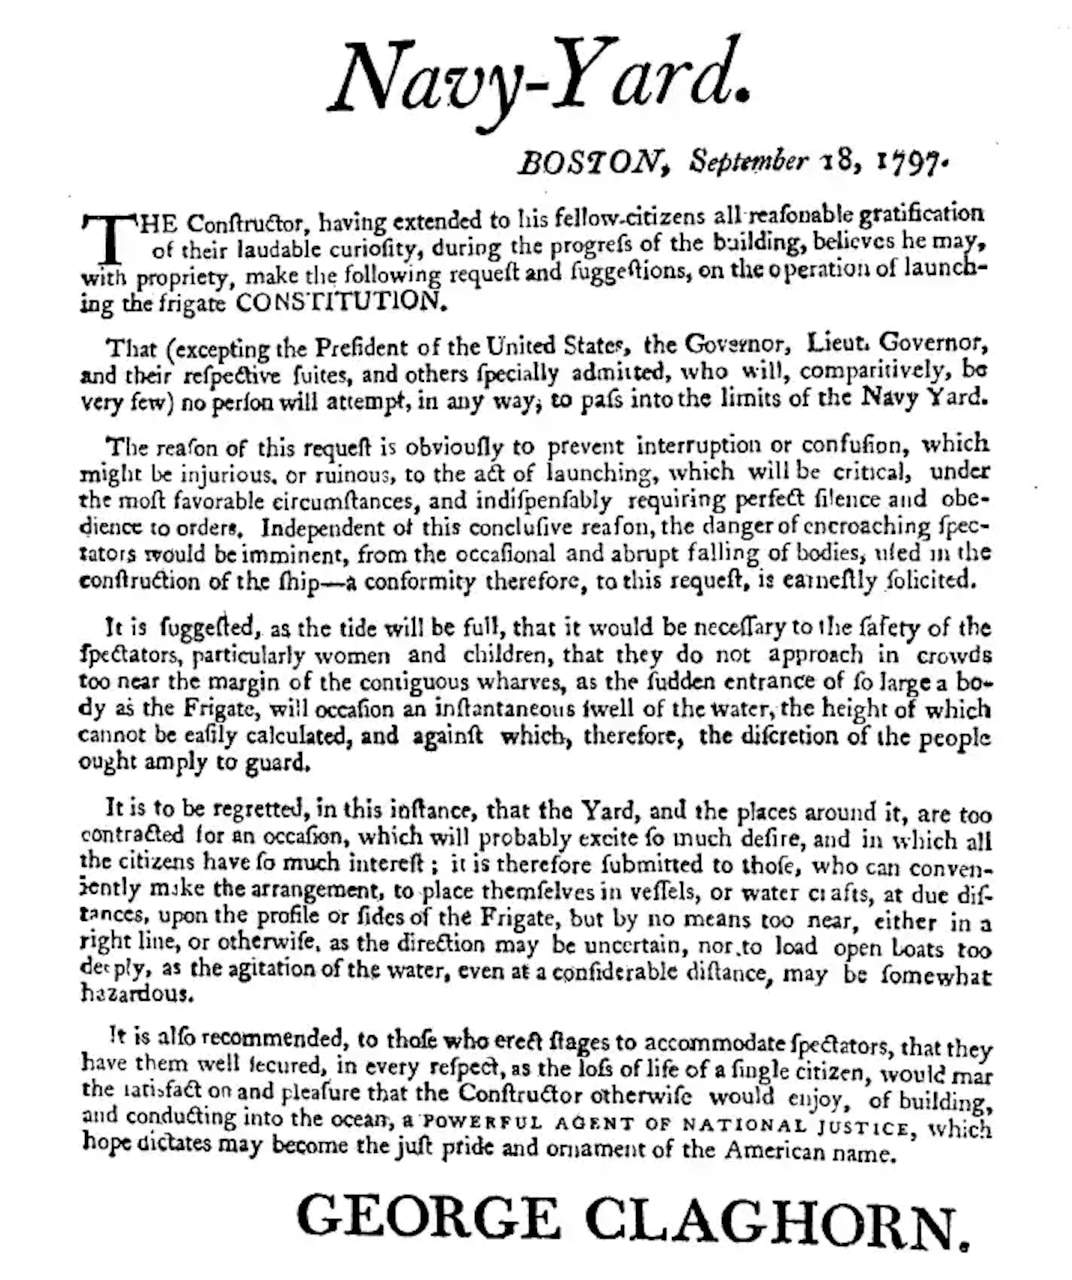 “Navy-Yard.” broadside distributed by Constitution’s constructor
George Claghorn two days before the frigate’s scheduled launch. The New England Magazine